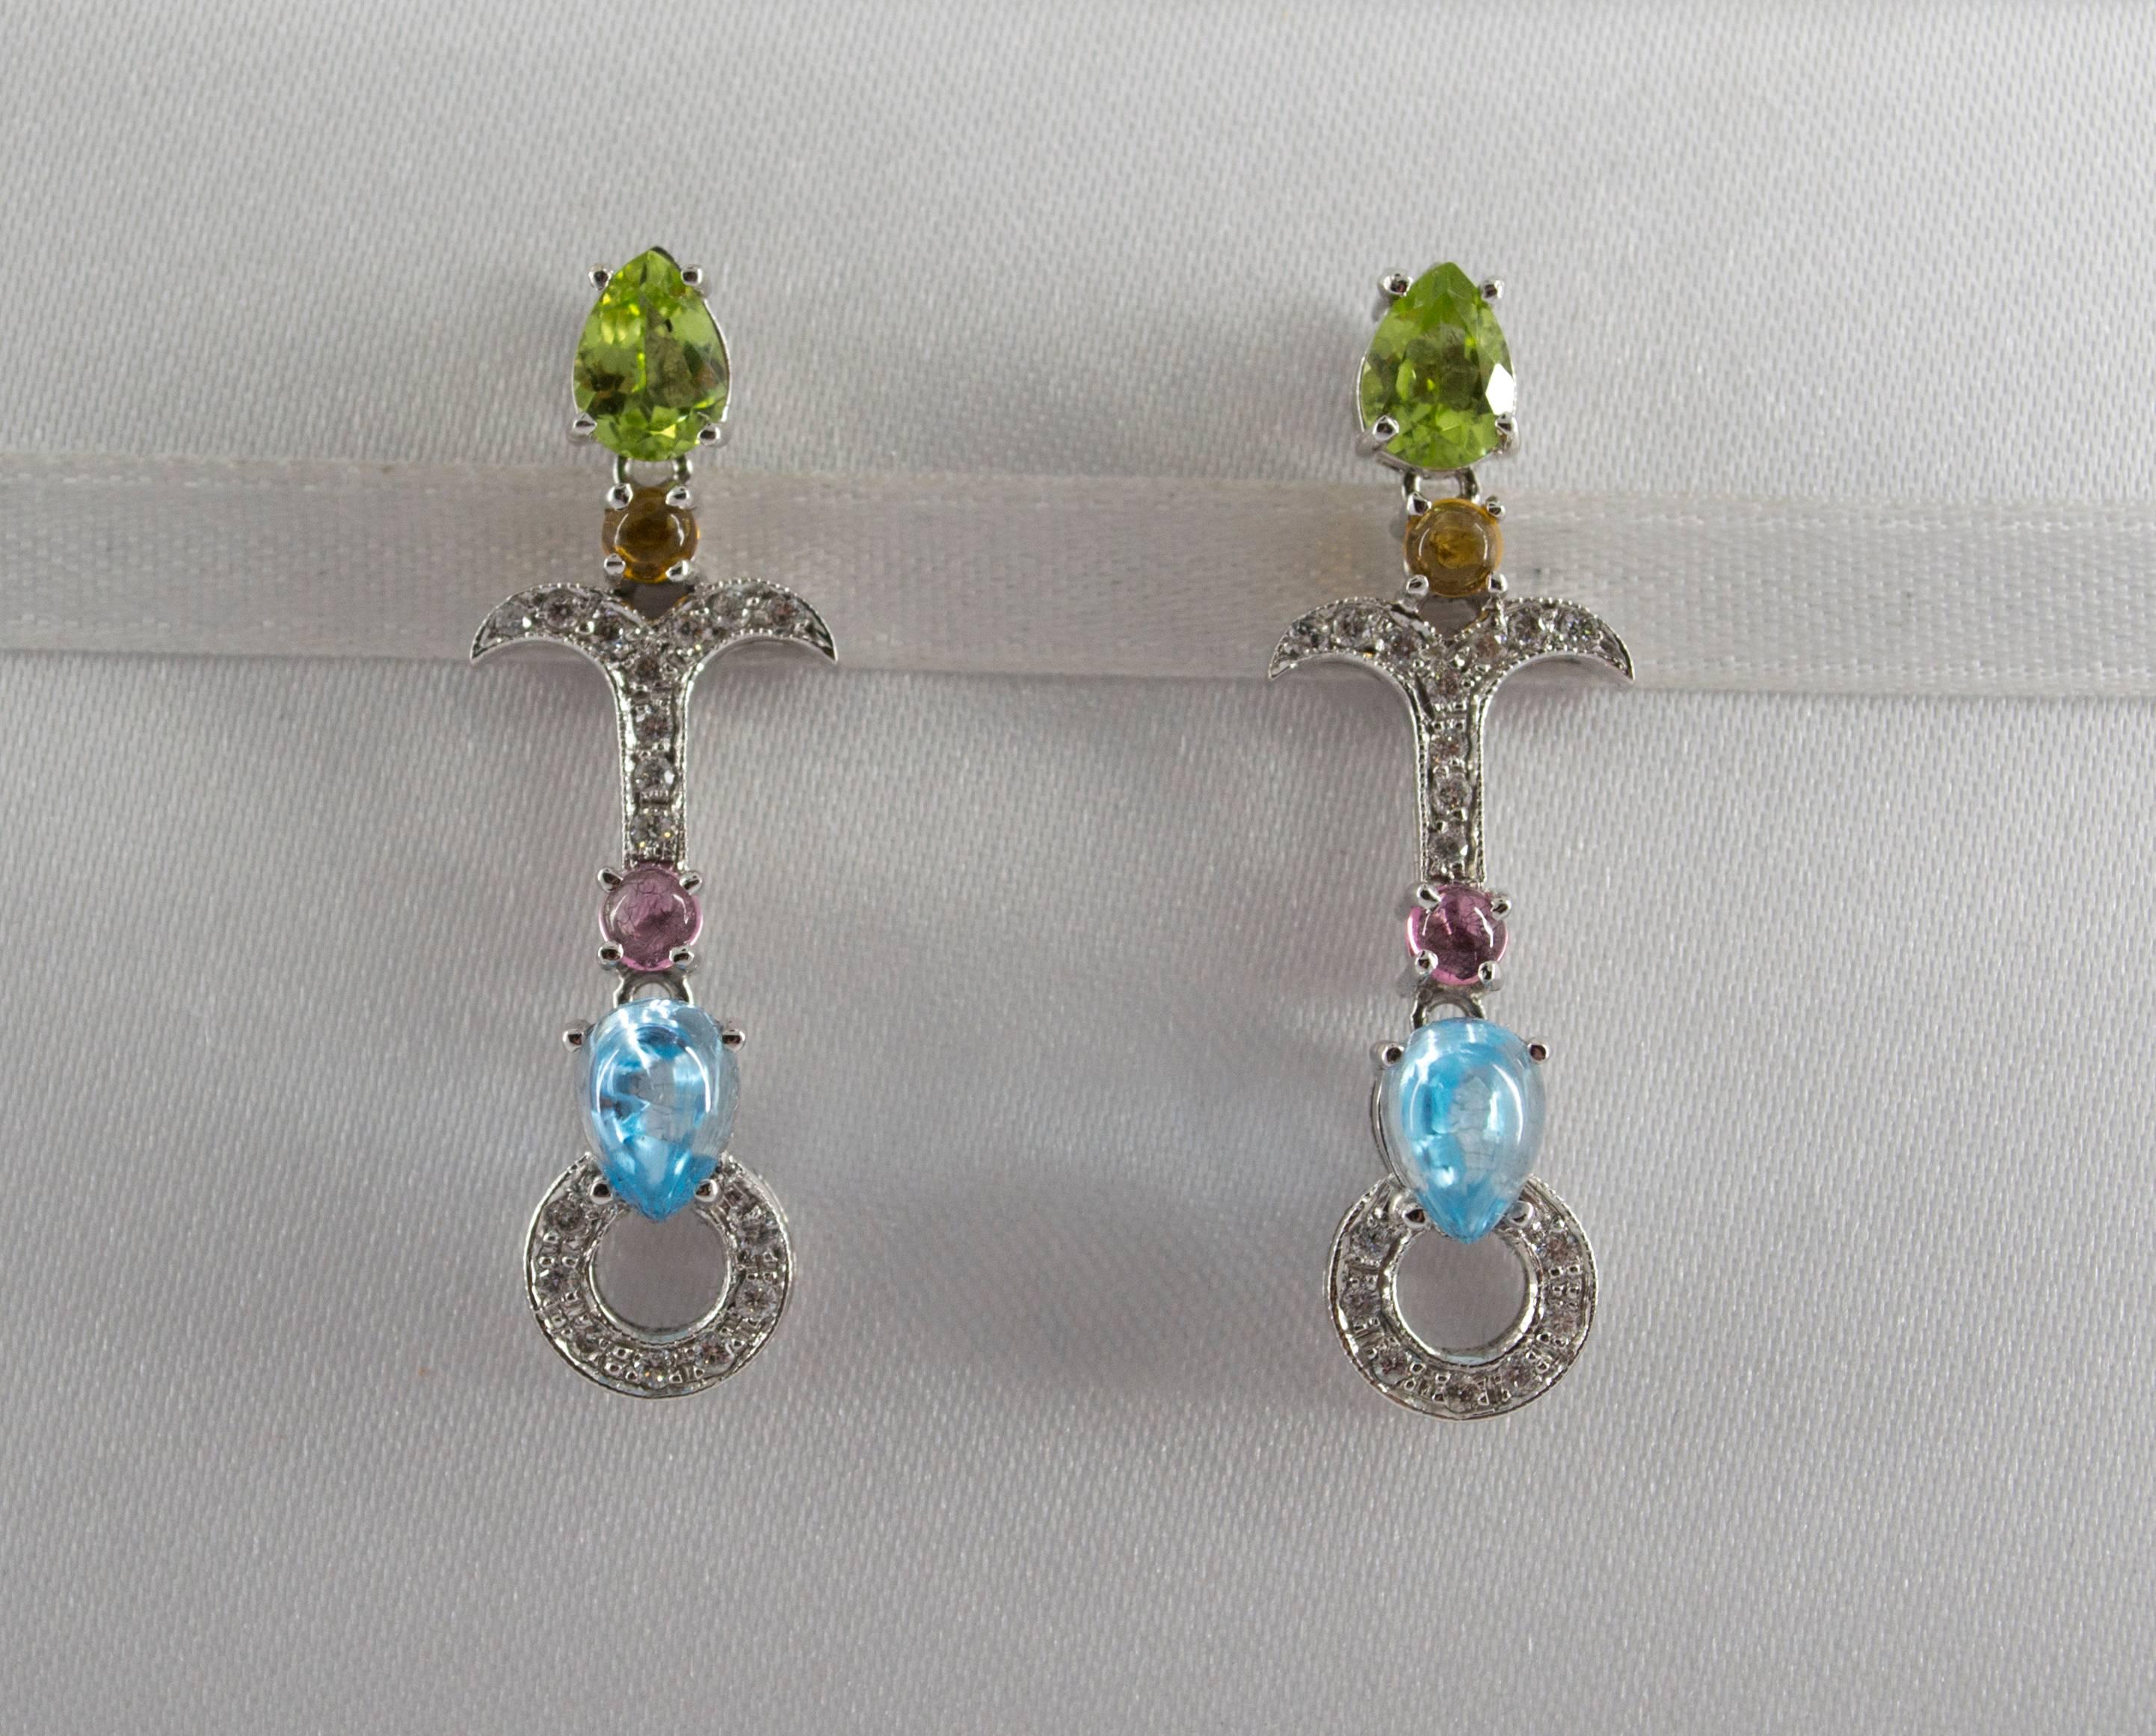 This Earrings are made of 9K White Gold.
This Earrings have Citrine and Amethyst.
This Earrings have 0.35 Carats of White Diamonds.
All our Earrings have pins for pierced ears but we can change the closure and make any of our Earrings suitable even